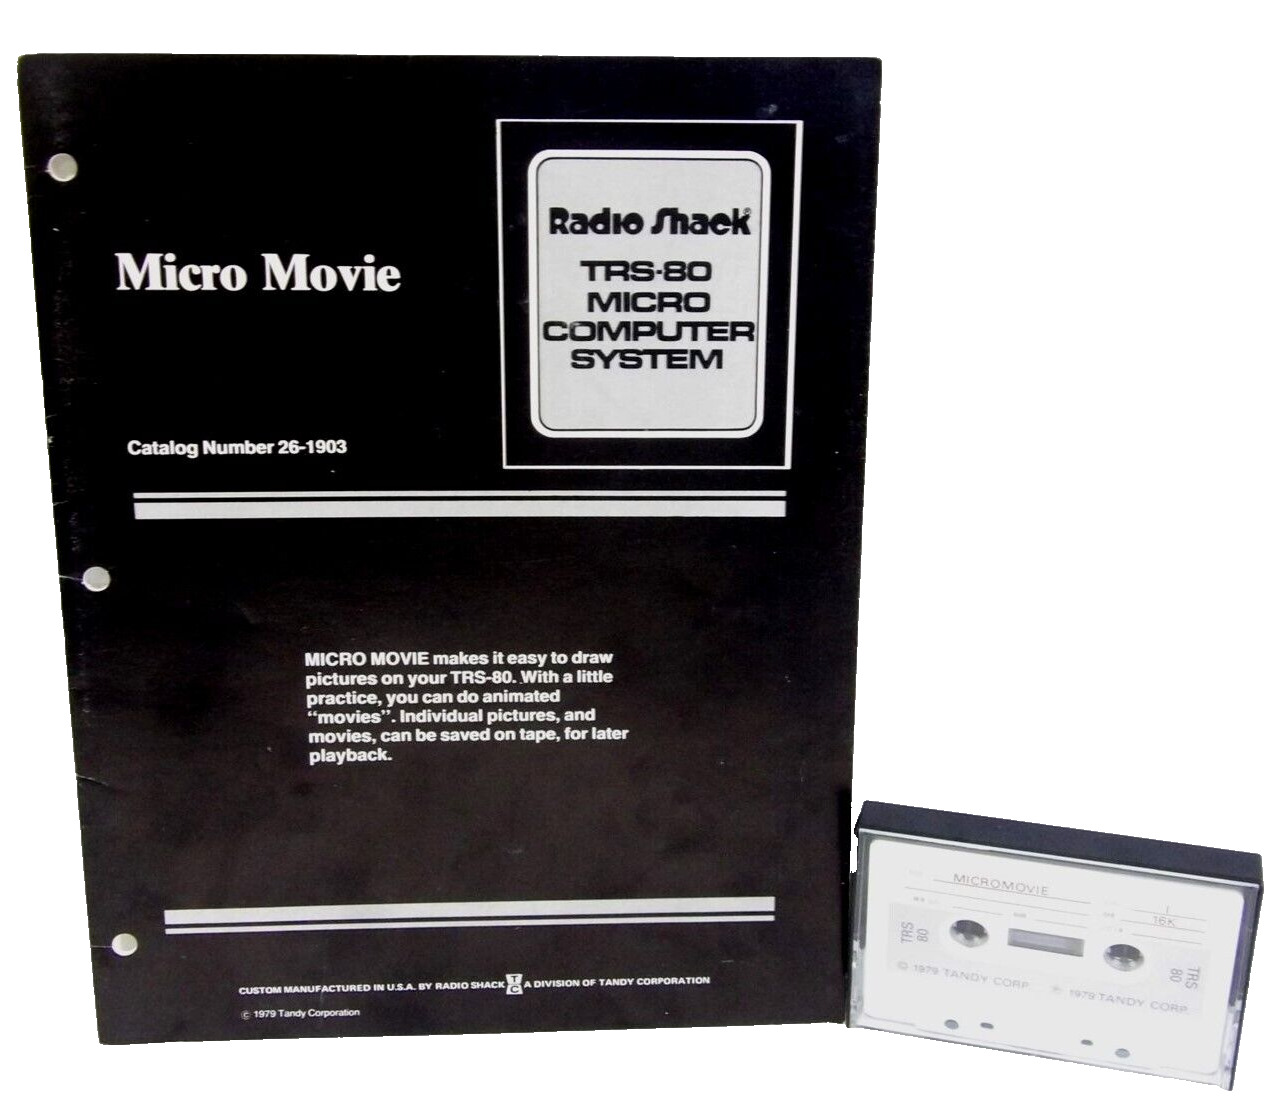 Radio Shack Tandy TRS-80 Micro Movie 26-1903 Cassette With Book Manual